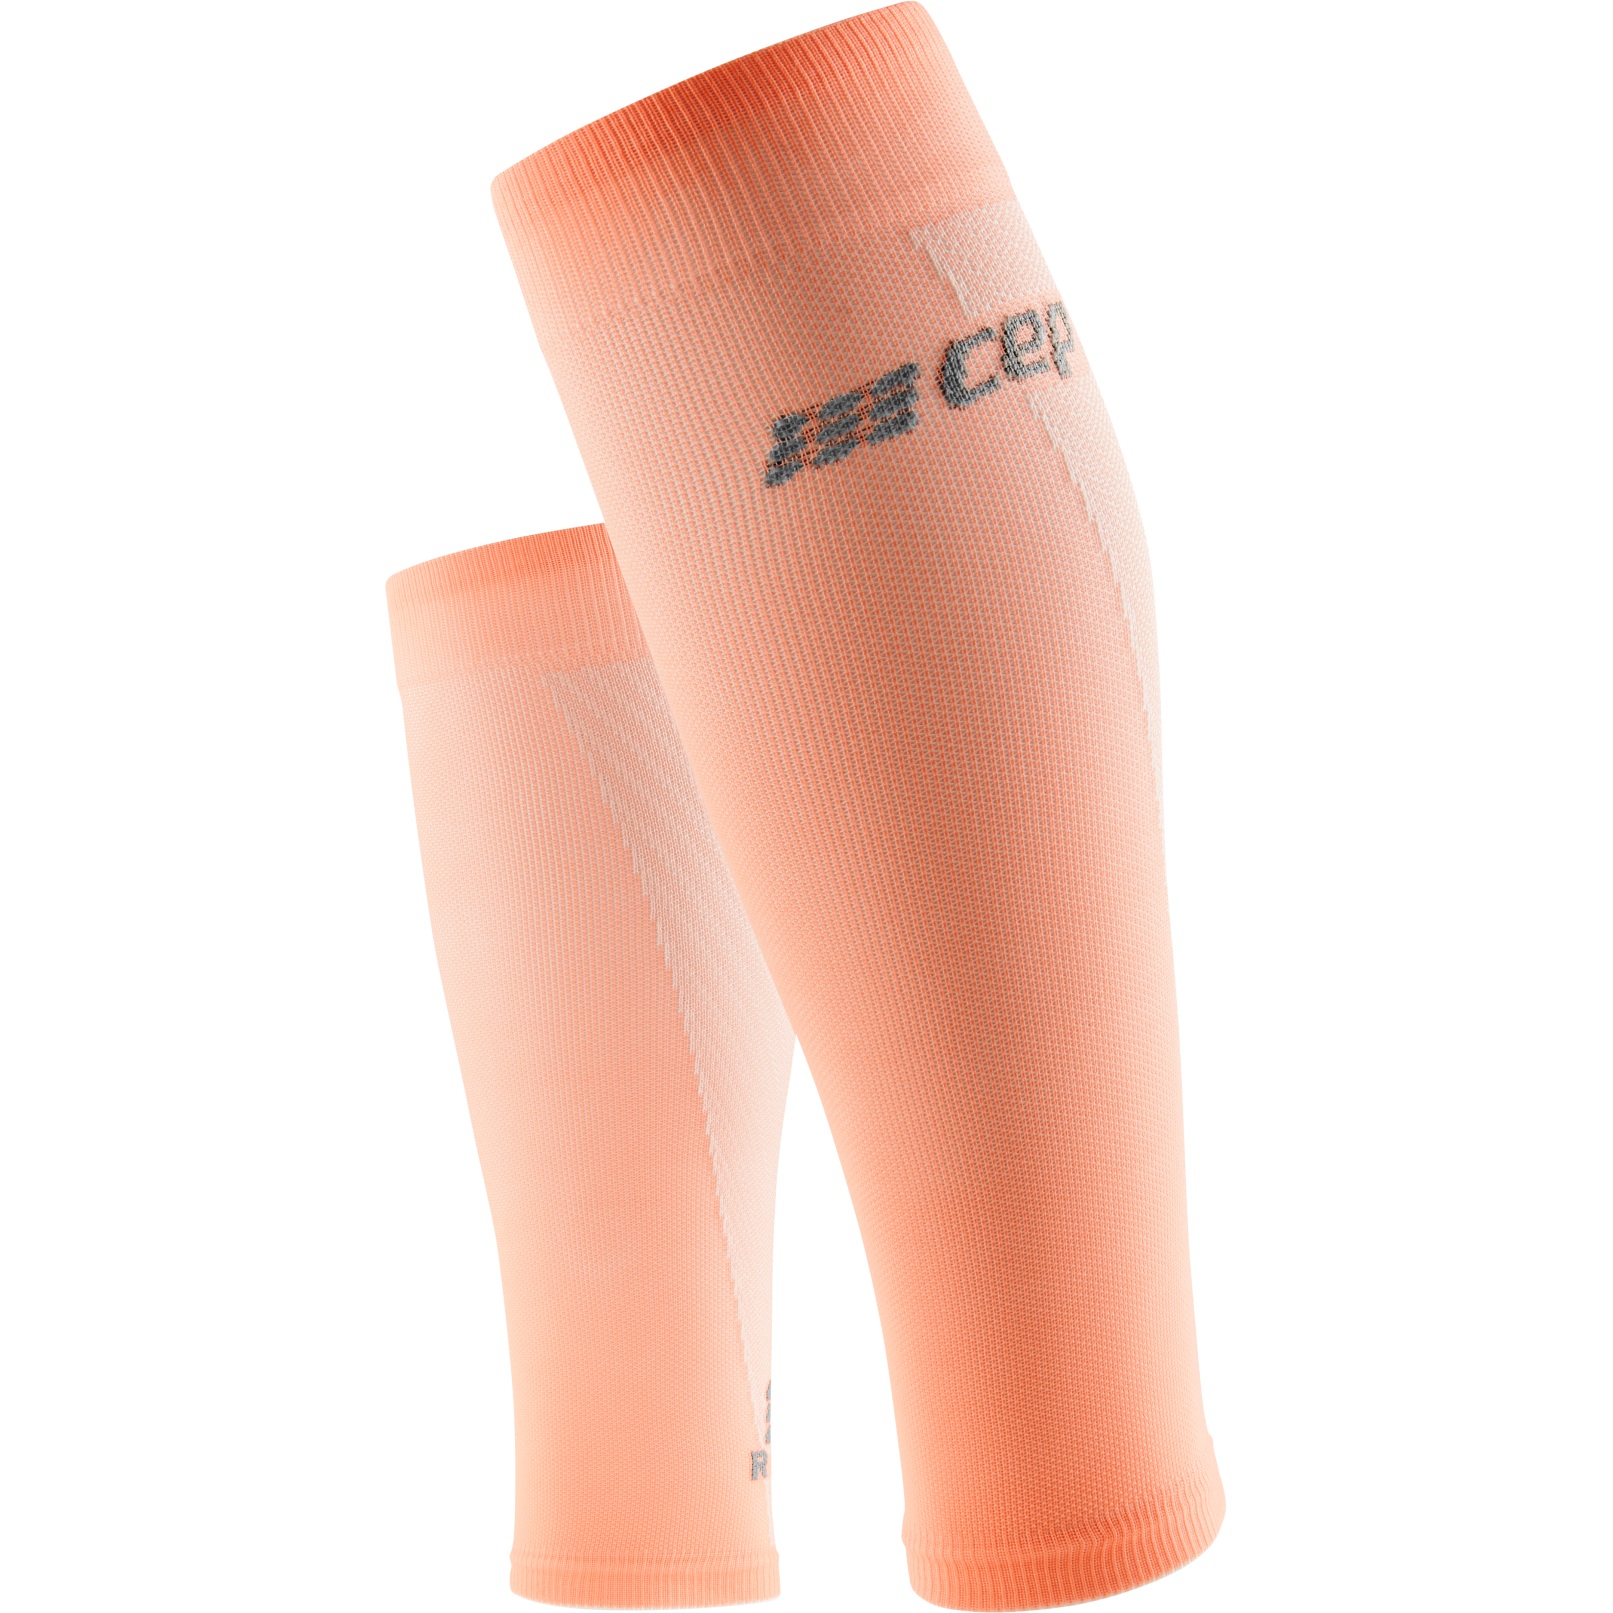 Image of CEP Ultralight Compression Calf Sleeves V3 Women - coral/cream